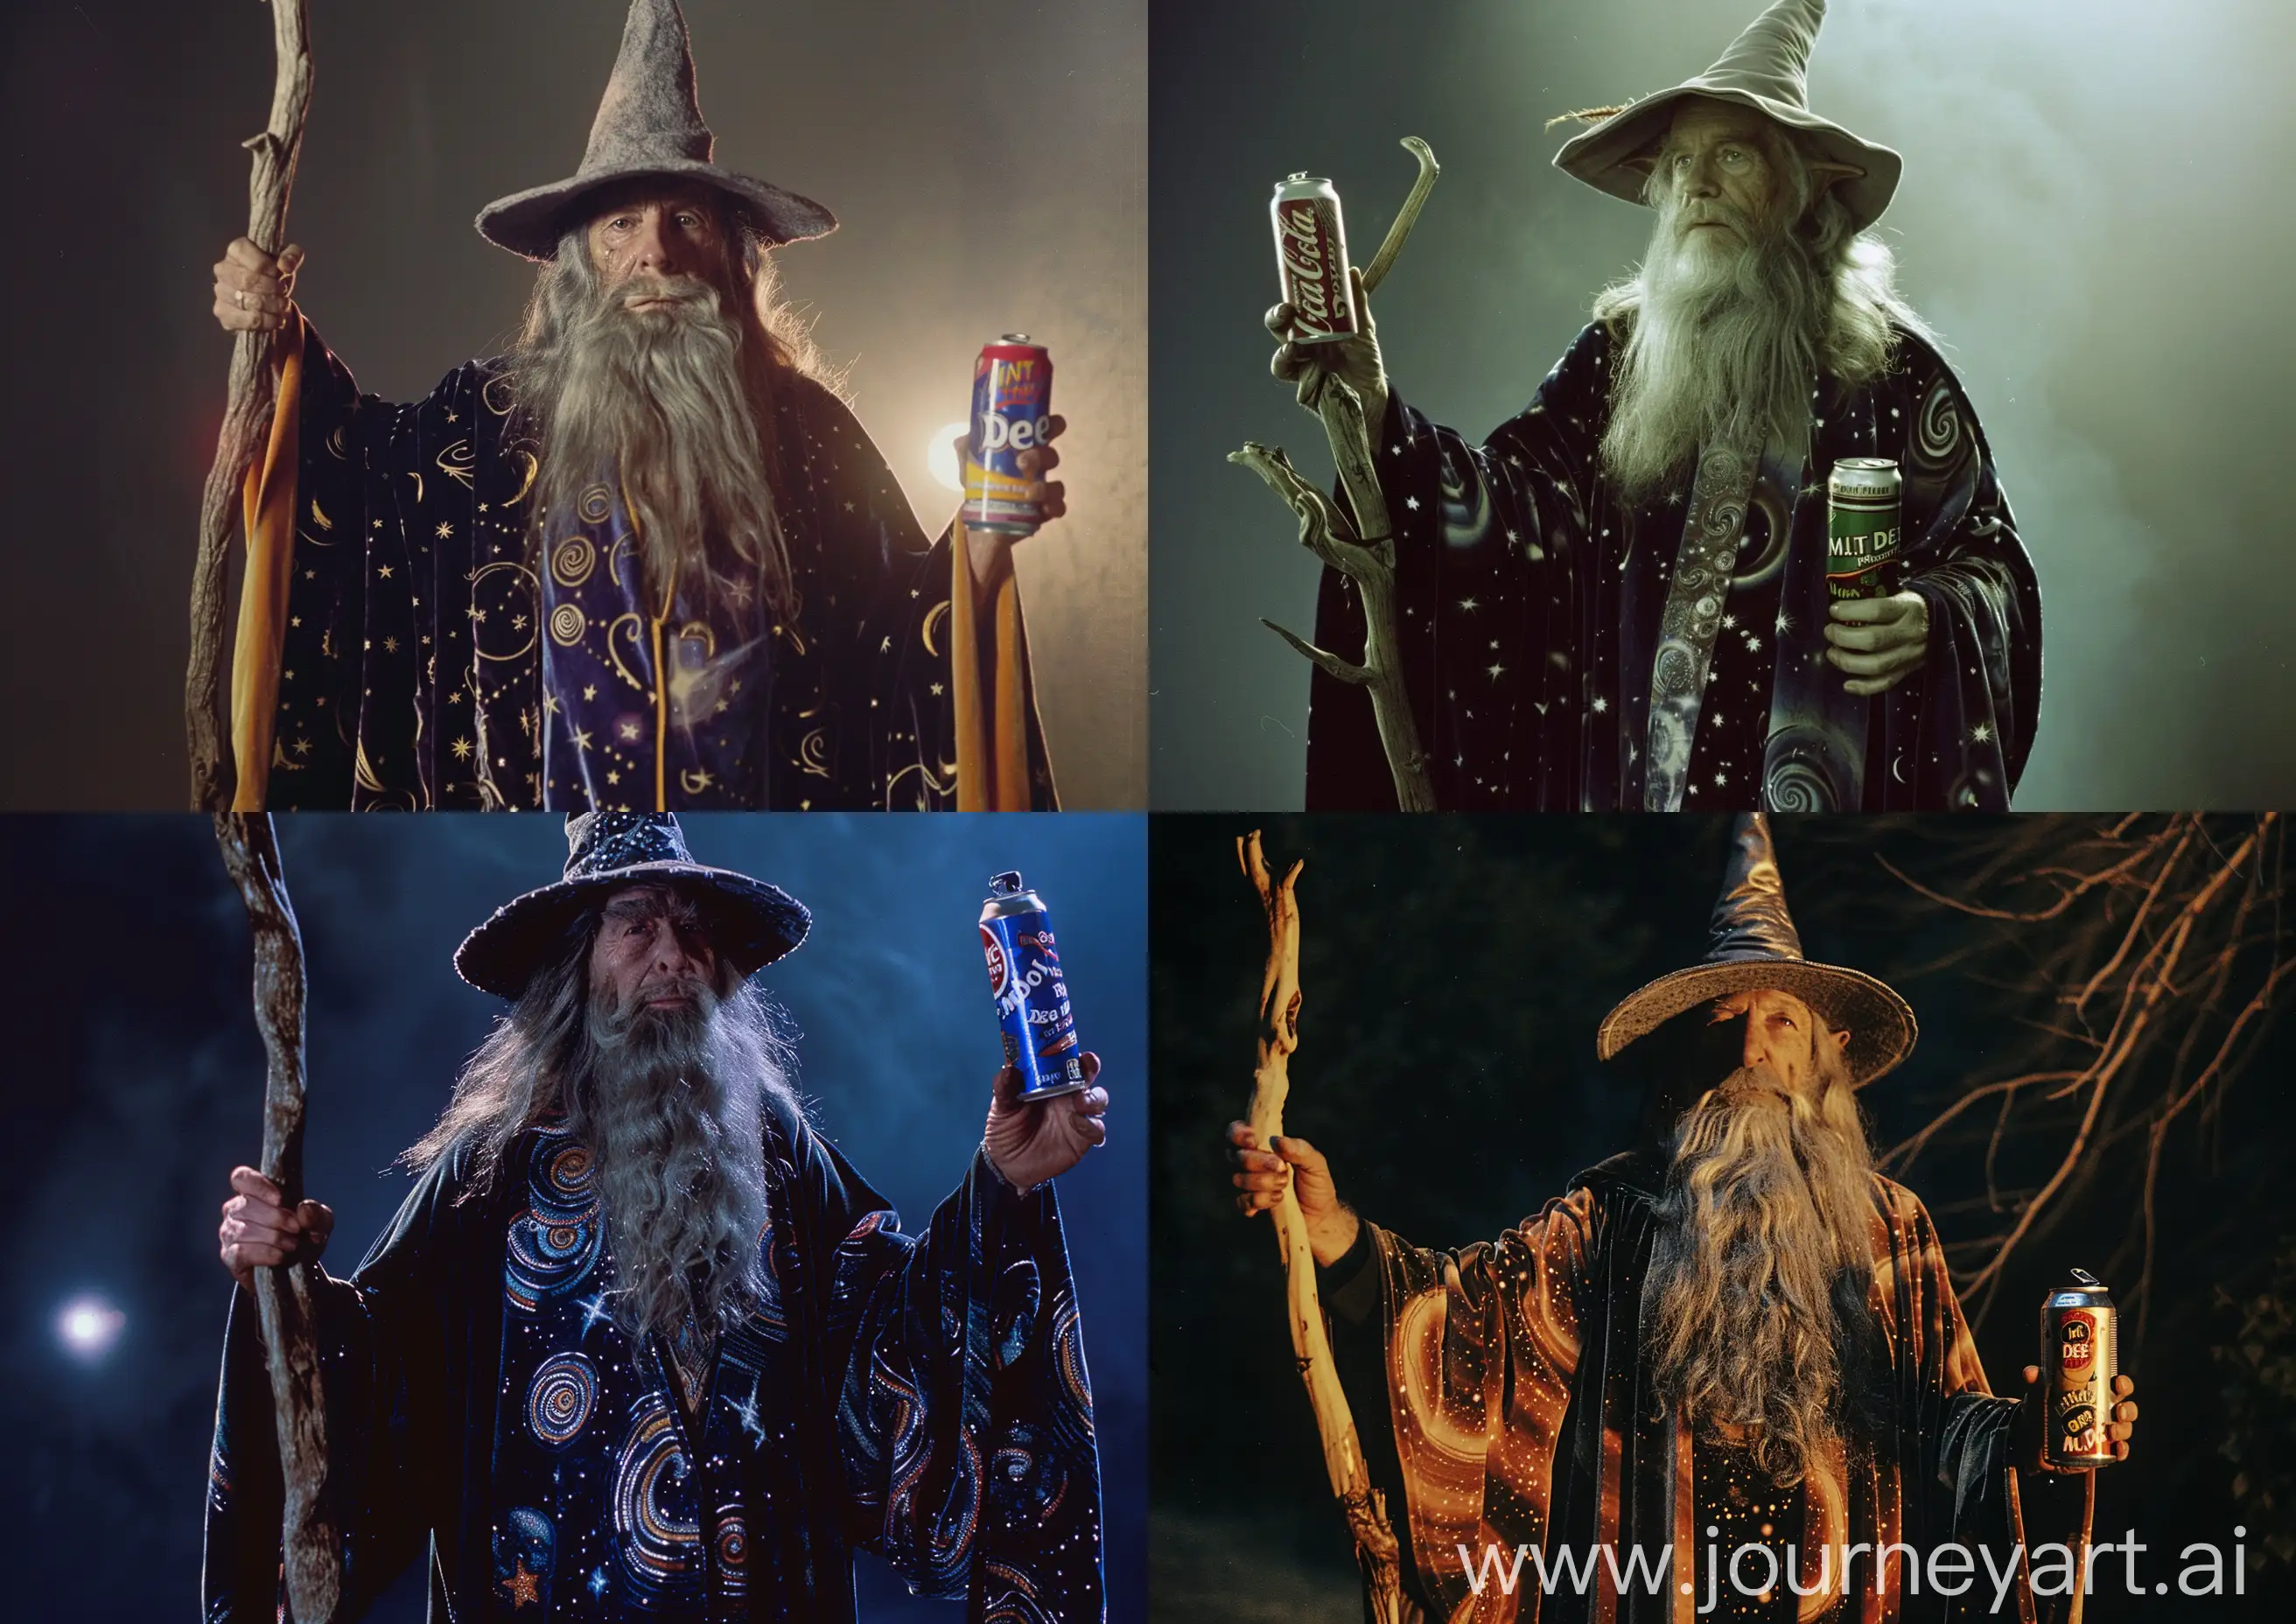 Wizard-with-Galactic-Robes-Holding-Staff-and-Mt-Dew-by-Moonlight